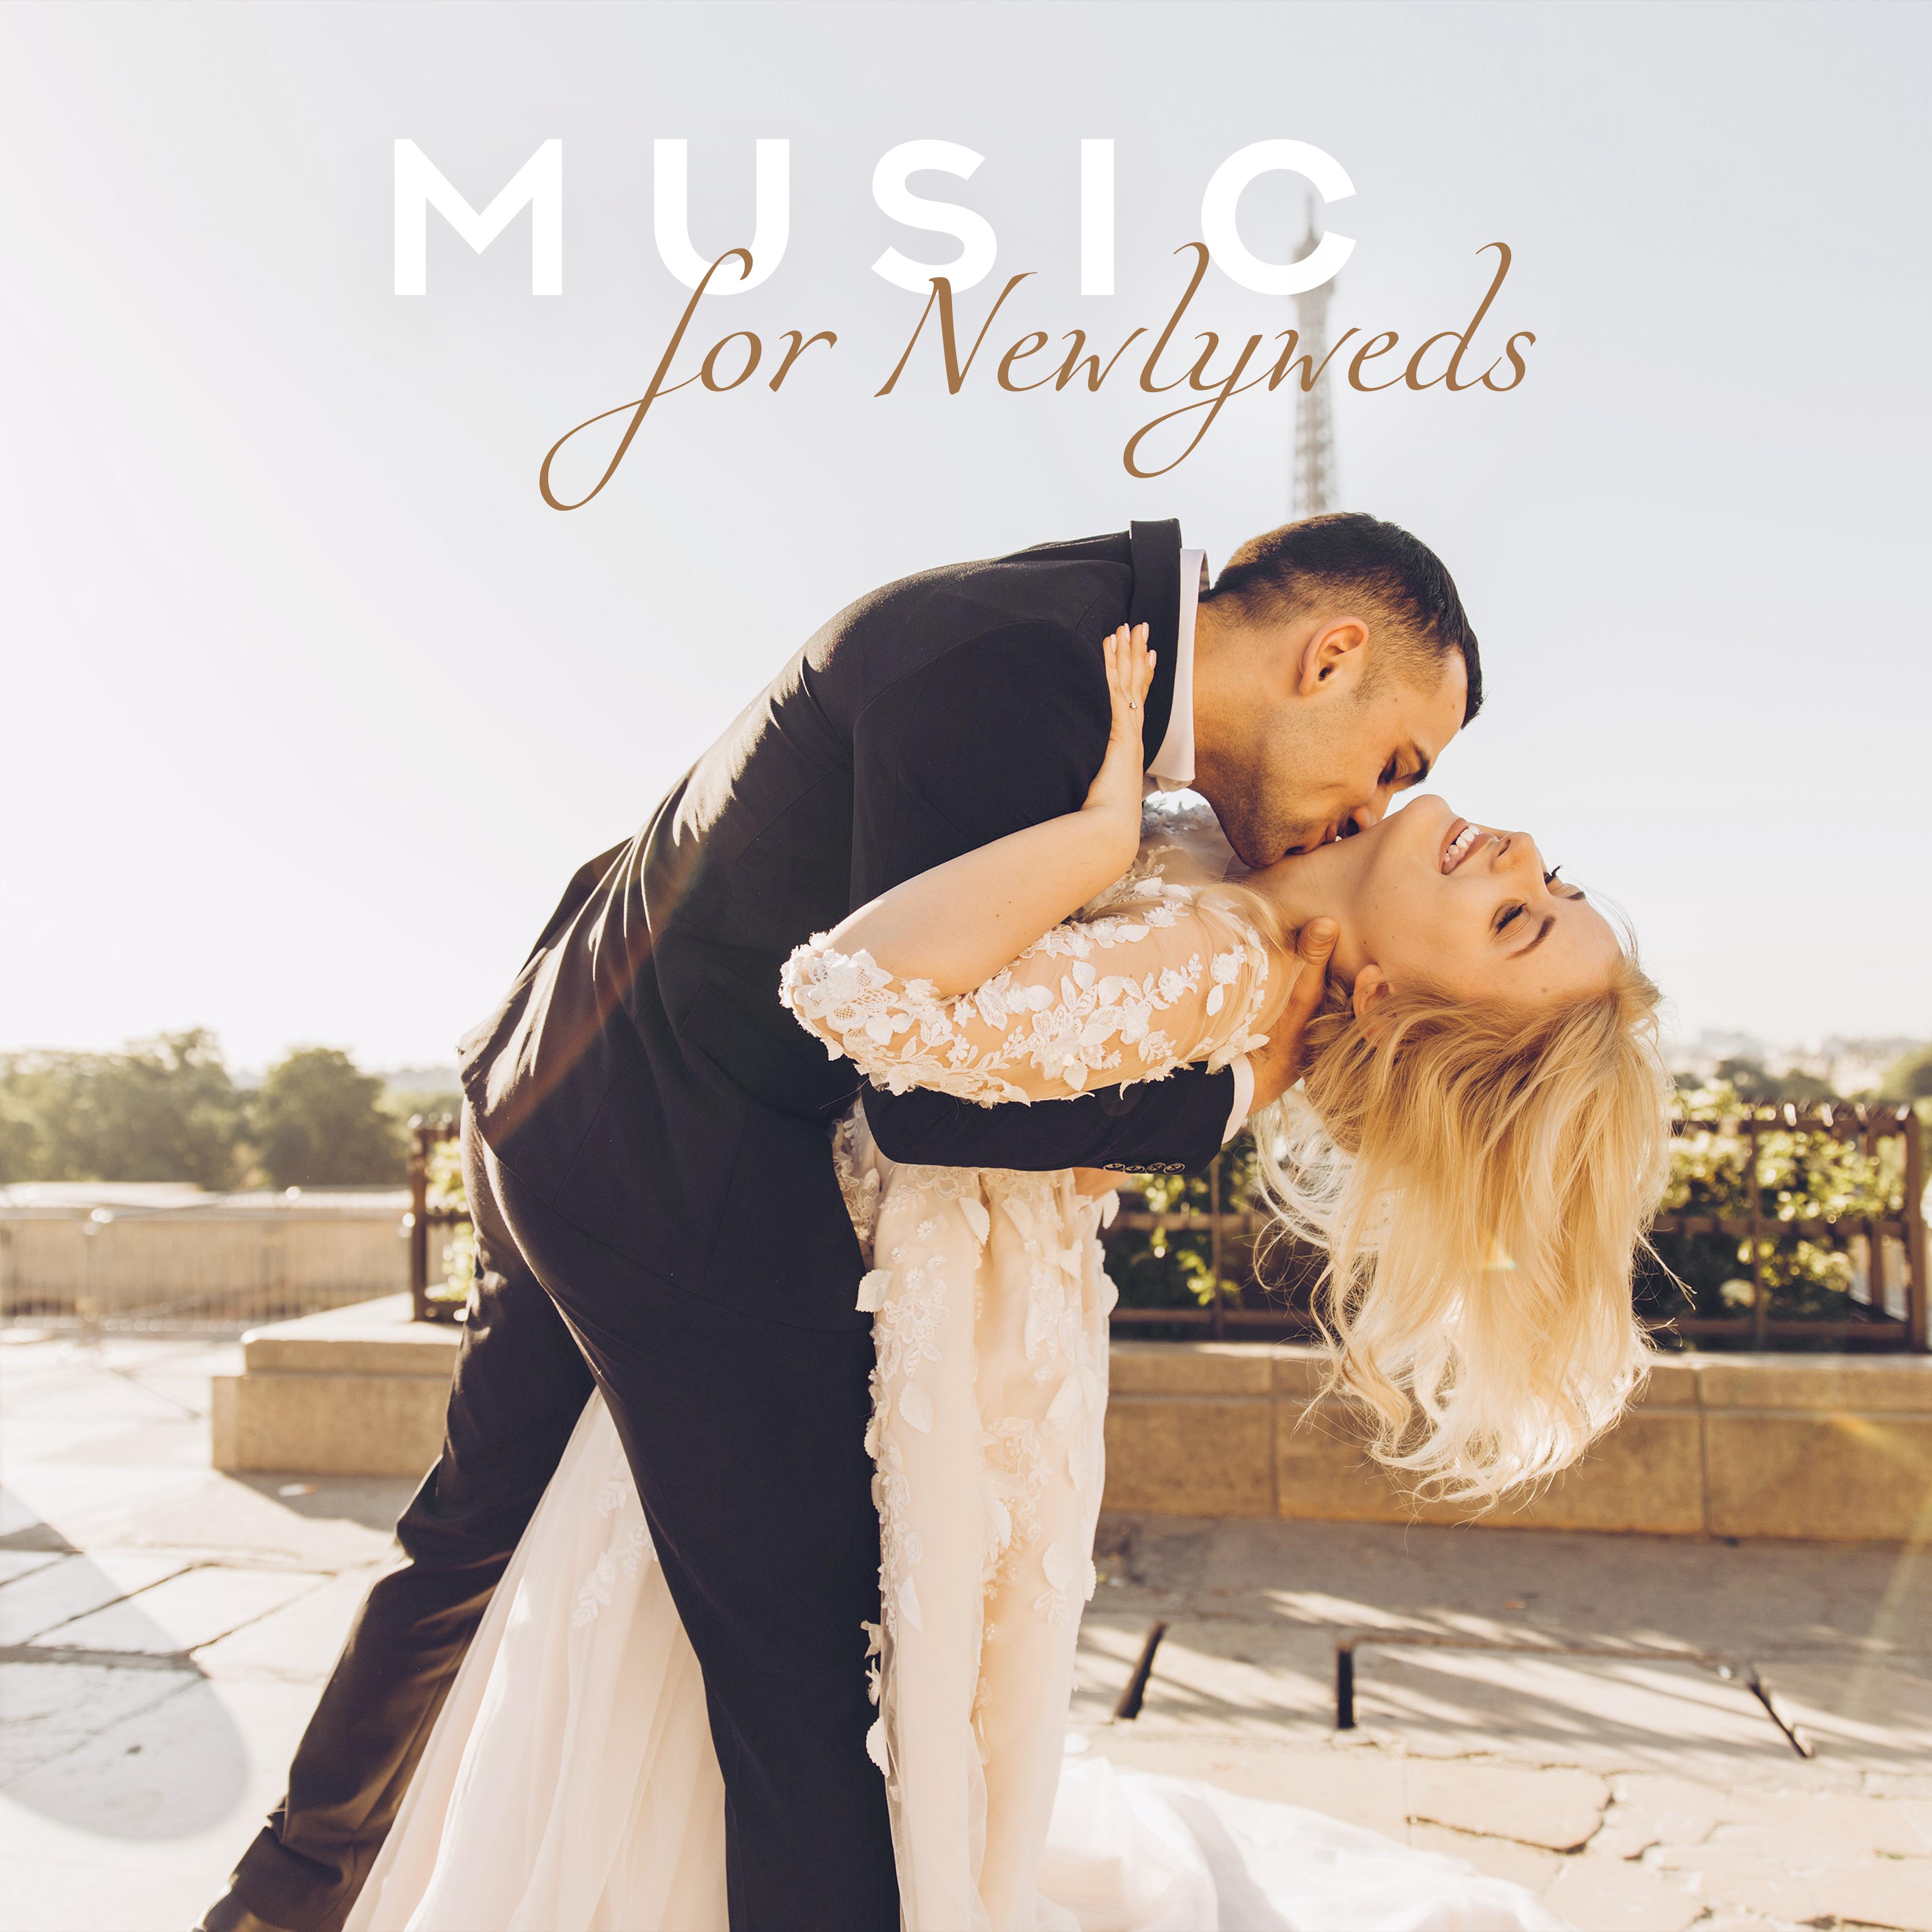 Music for Newlyweds - Romantic Piano Compositions for a Bride and Groom